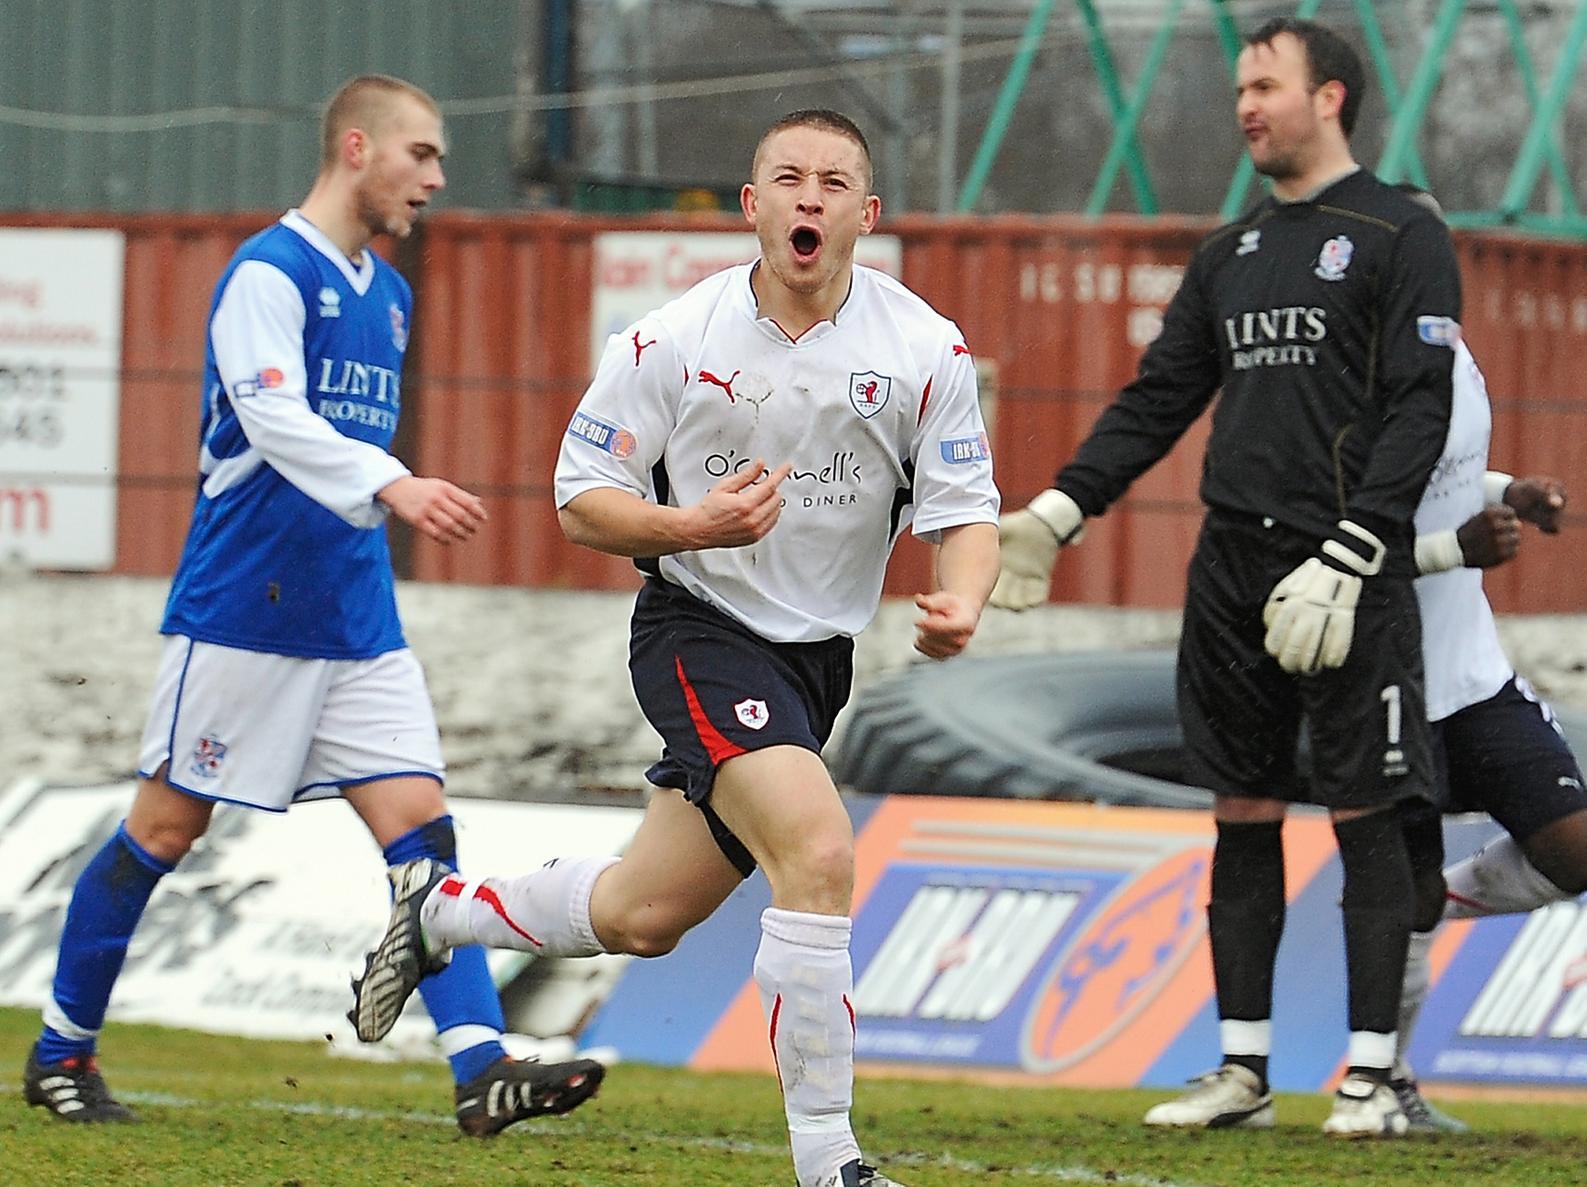 Now in his third spell with the club, Baird was initially part of the side that finished runners-up in the First Division in 2010-11, then returned to score the extra-time winner against Rangers in the Ramsdens Cup final of 2014.